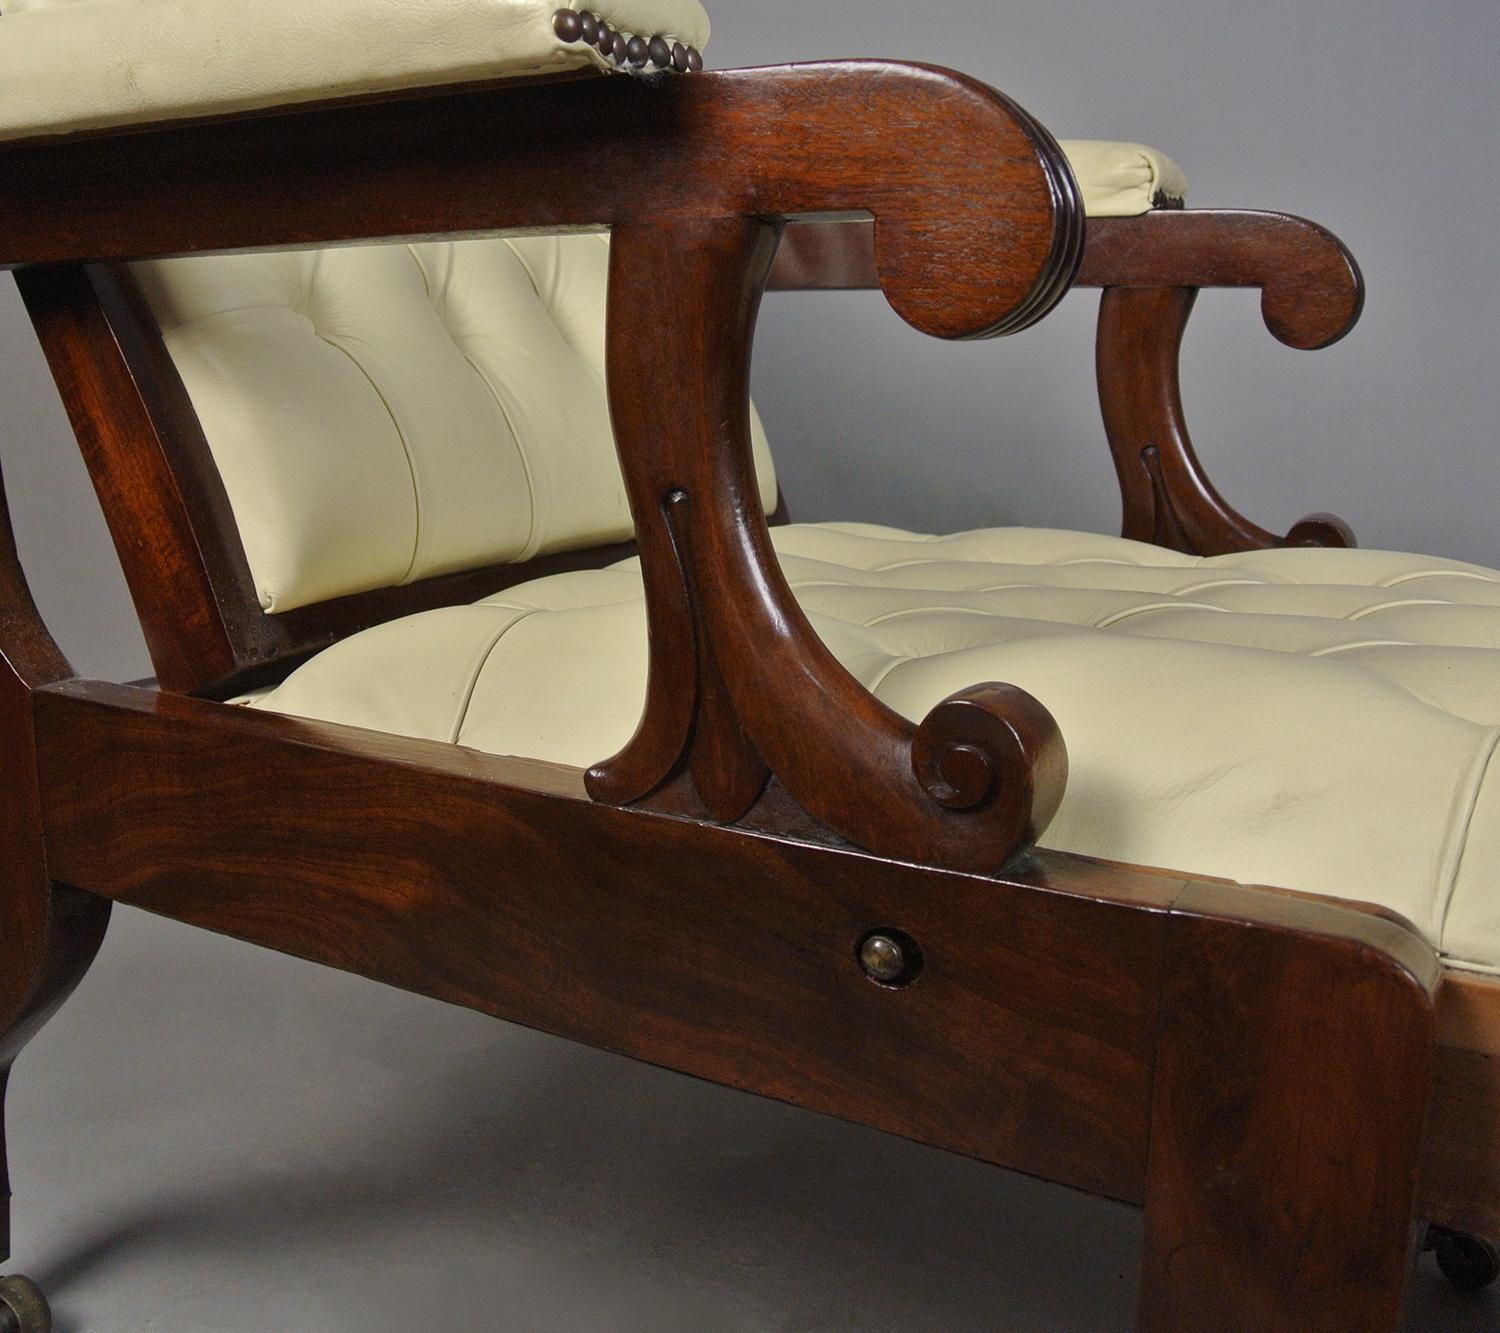 Regency Solid Mahogany ‘Daws Patent’ Reclining Chair c. 1830 In Good Condition For Sale In Heathfield, GB